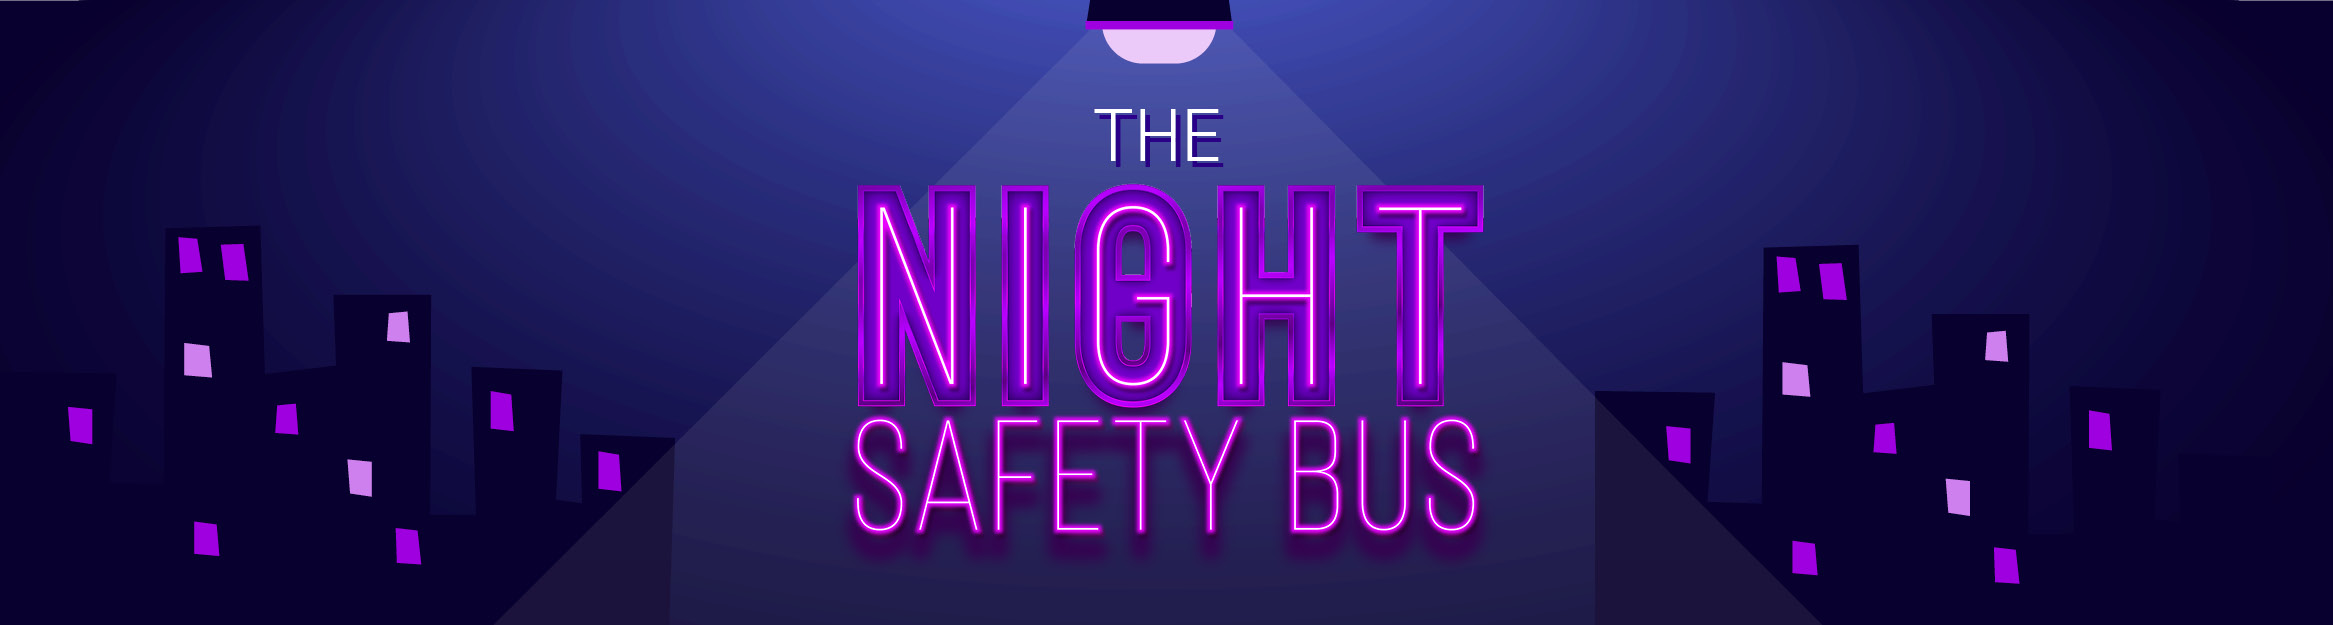 The Night Safety Bus